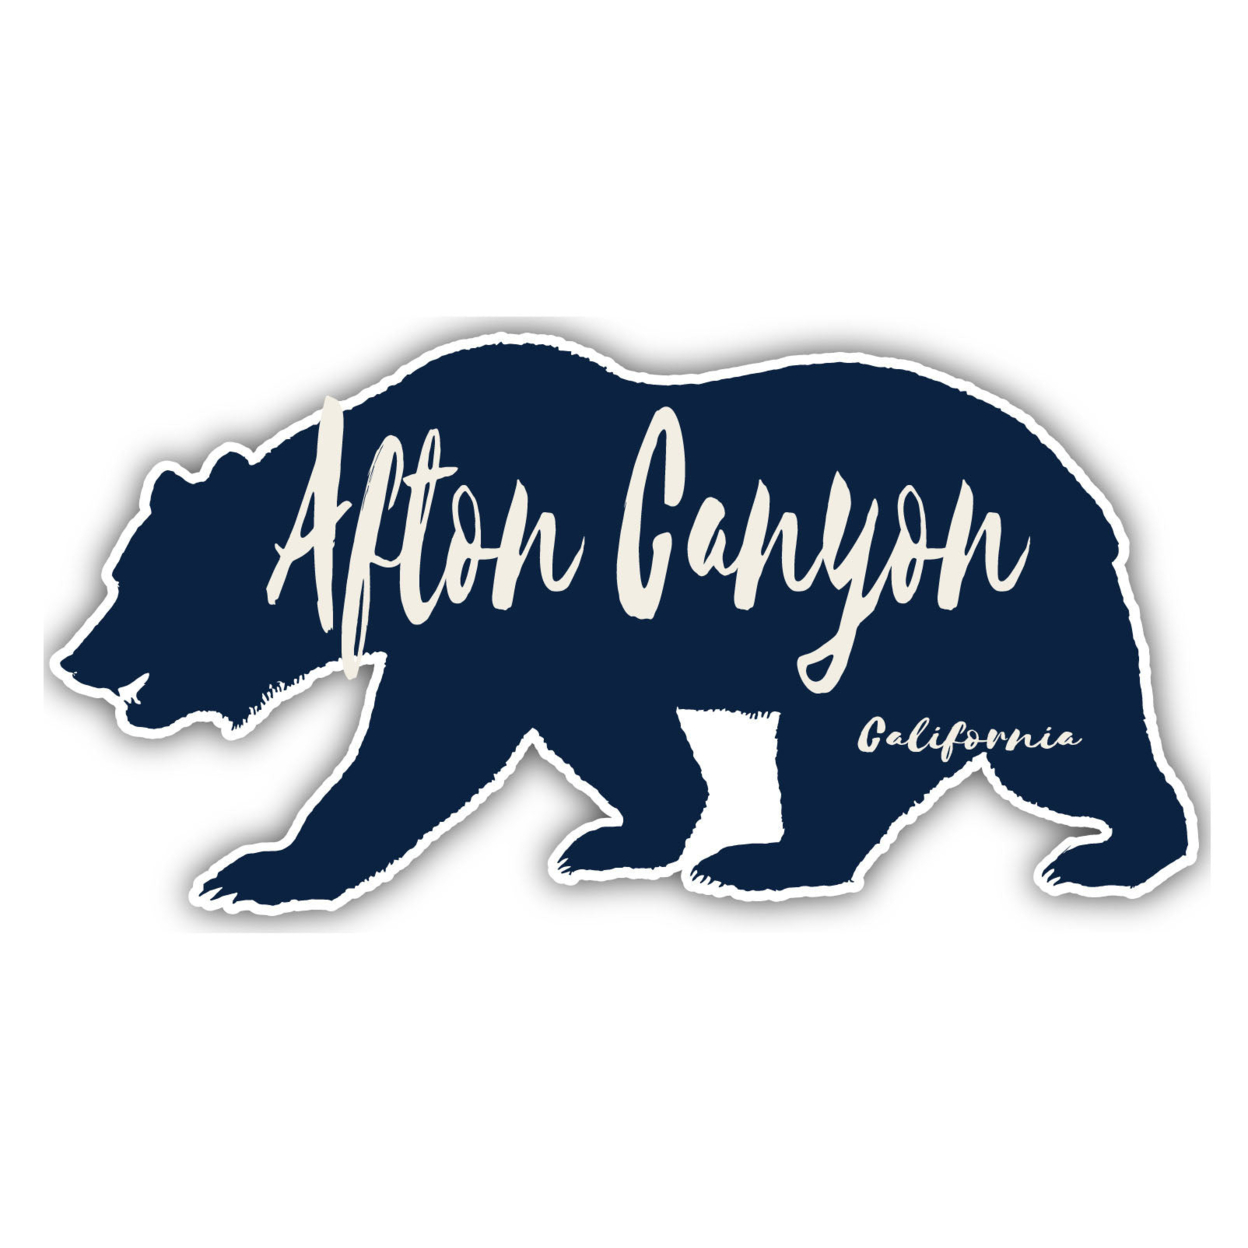 Afton Canyon California Souvenir Decorative Stickers (Choose Theme And Size) - 4-Pack, 8-Inch, Bear